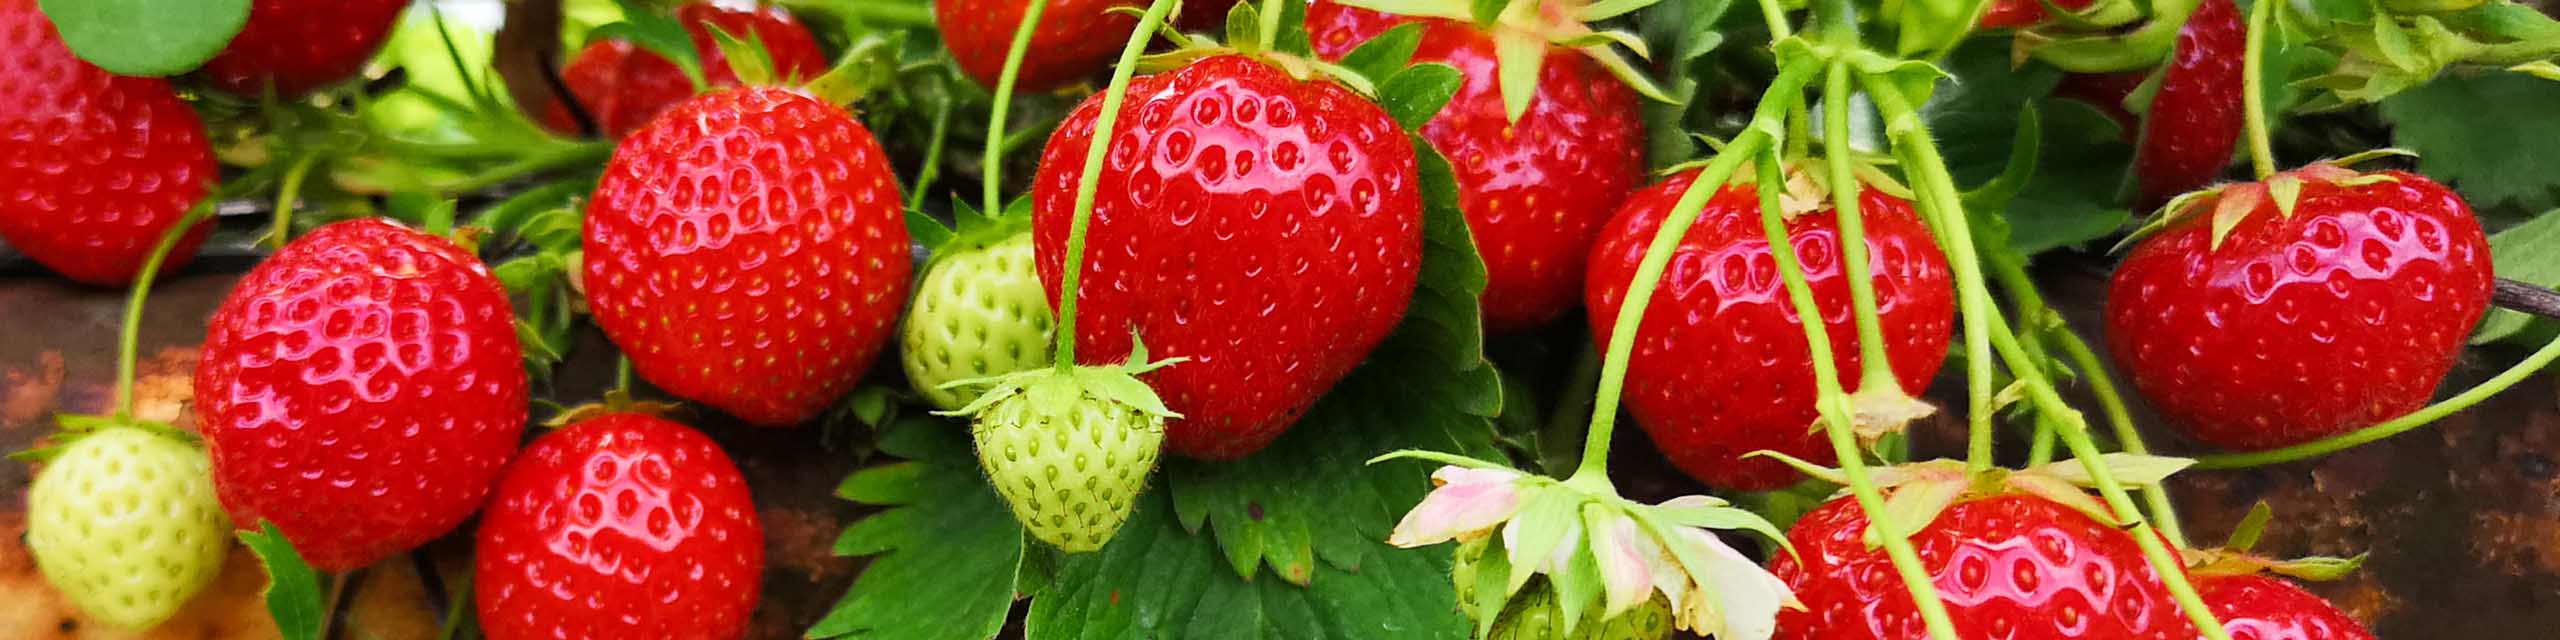 Close up of ripe strawberries growing on the plant.